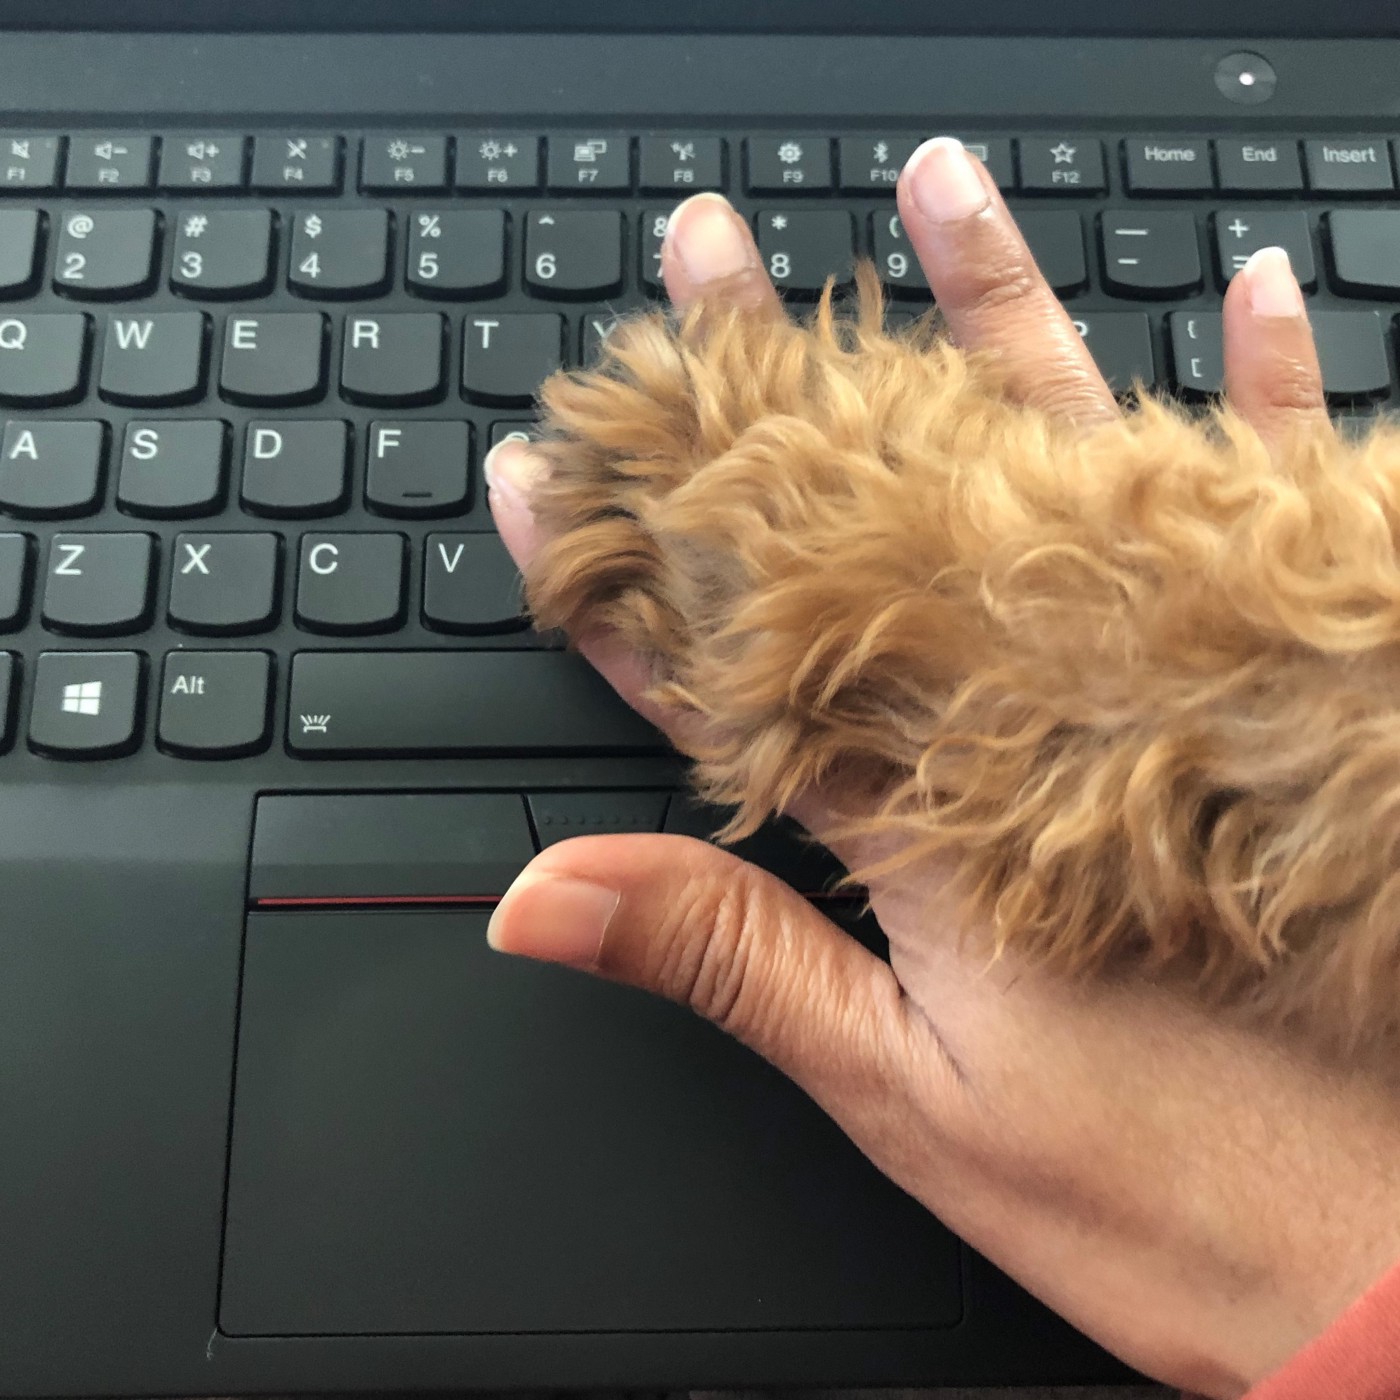 Lucy's paw reaching on top of a hand at a keyboard